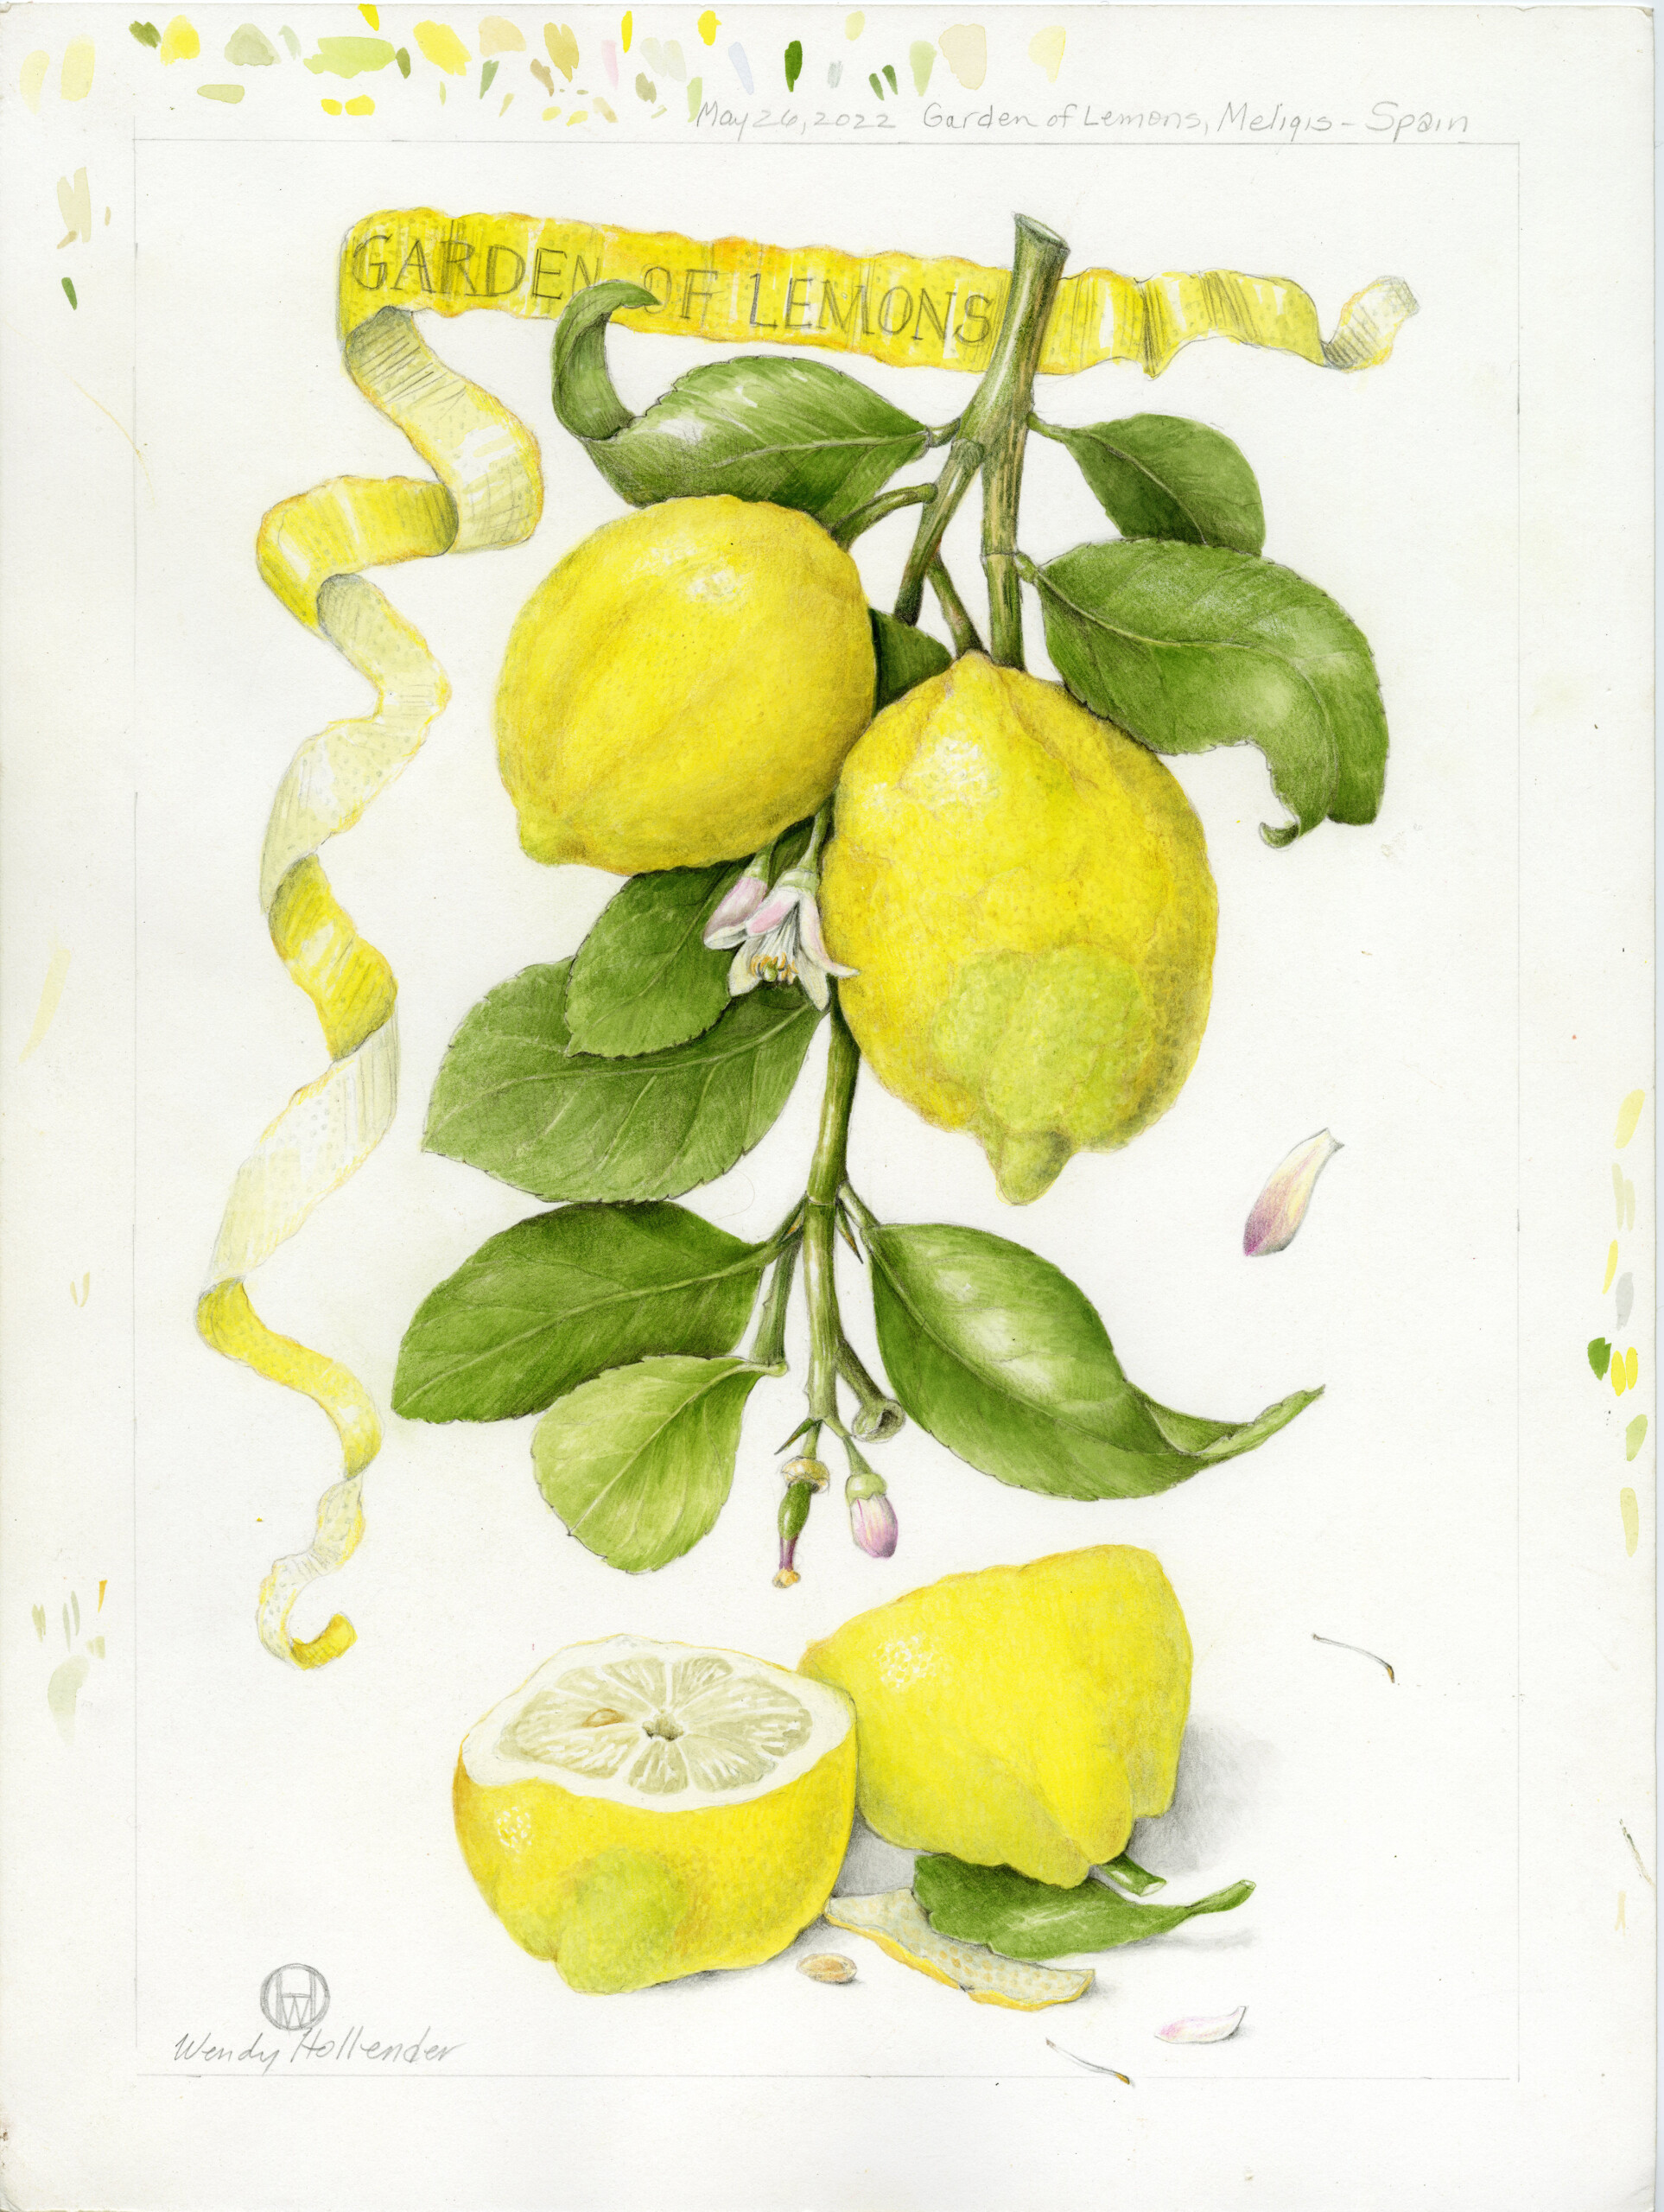 Lemons from the Garden of Lemons in 2022 shown attached to a branch with buds flowers and leaves, at the bottom there is a lemon cut in half, at the top and down the left side, there is a curling lemon peel that says Garden of Lemons in the ribbon at the top, botanical illustration by Wendy Hollender